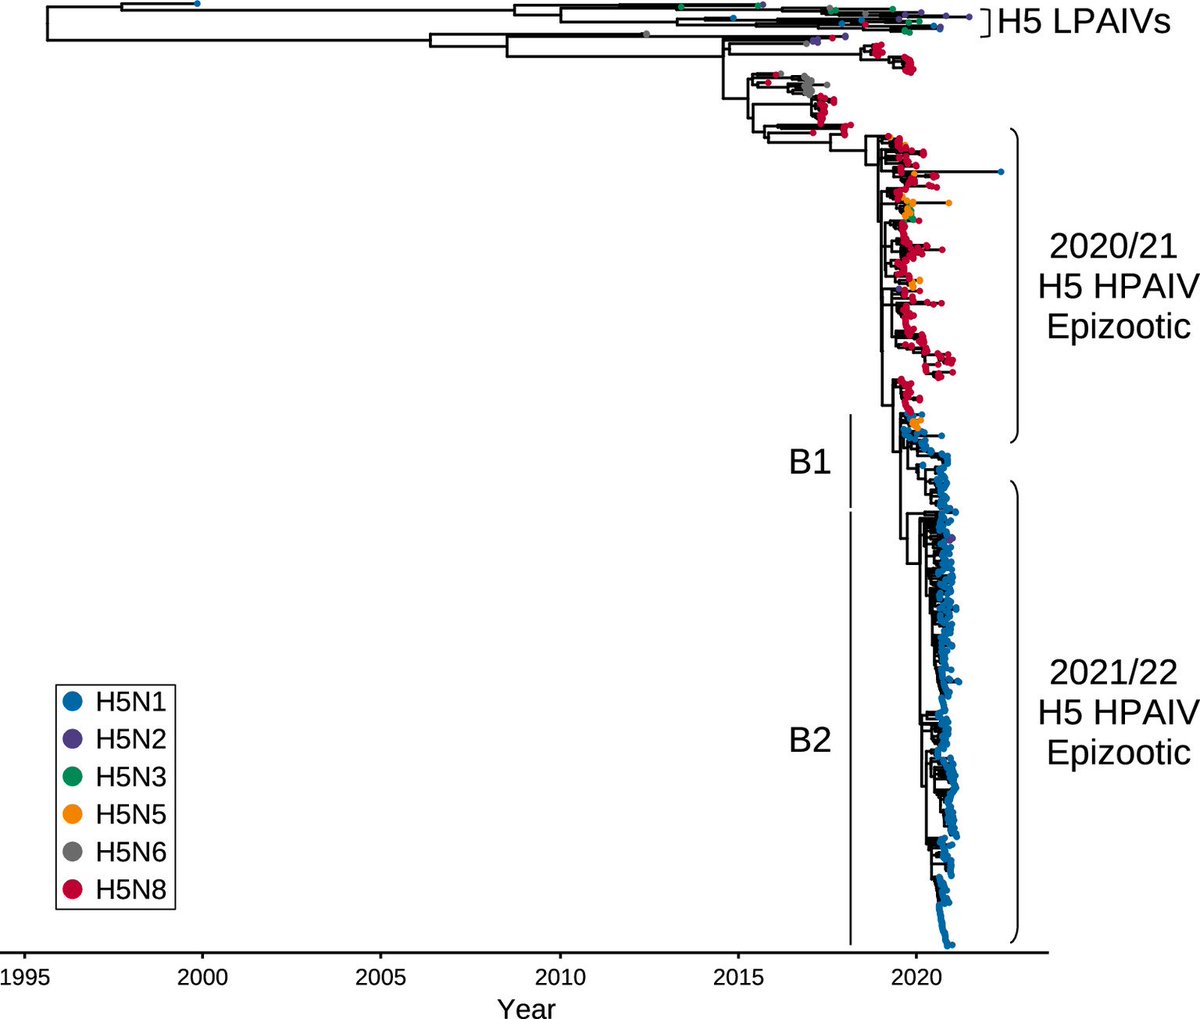 Virus genomic data from the UK eloquently demonstrate the shift to 2.3.4.4b H5N1 at the end of 2021 from H5Nx the previous year. Large diveresity of reassortants. 👉journals.asm.org/doi/epub/10.11…